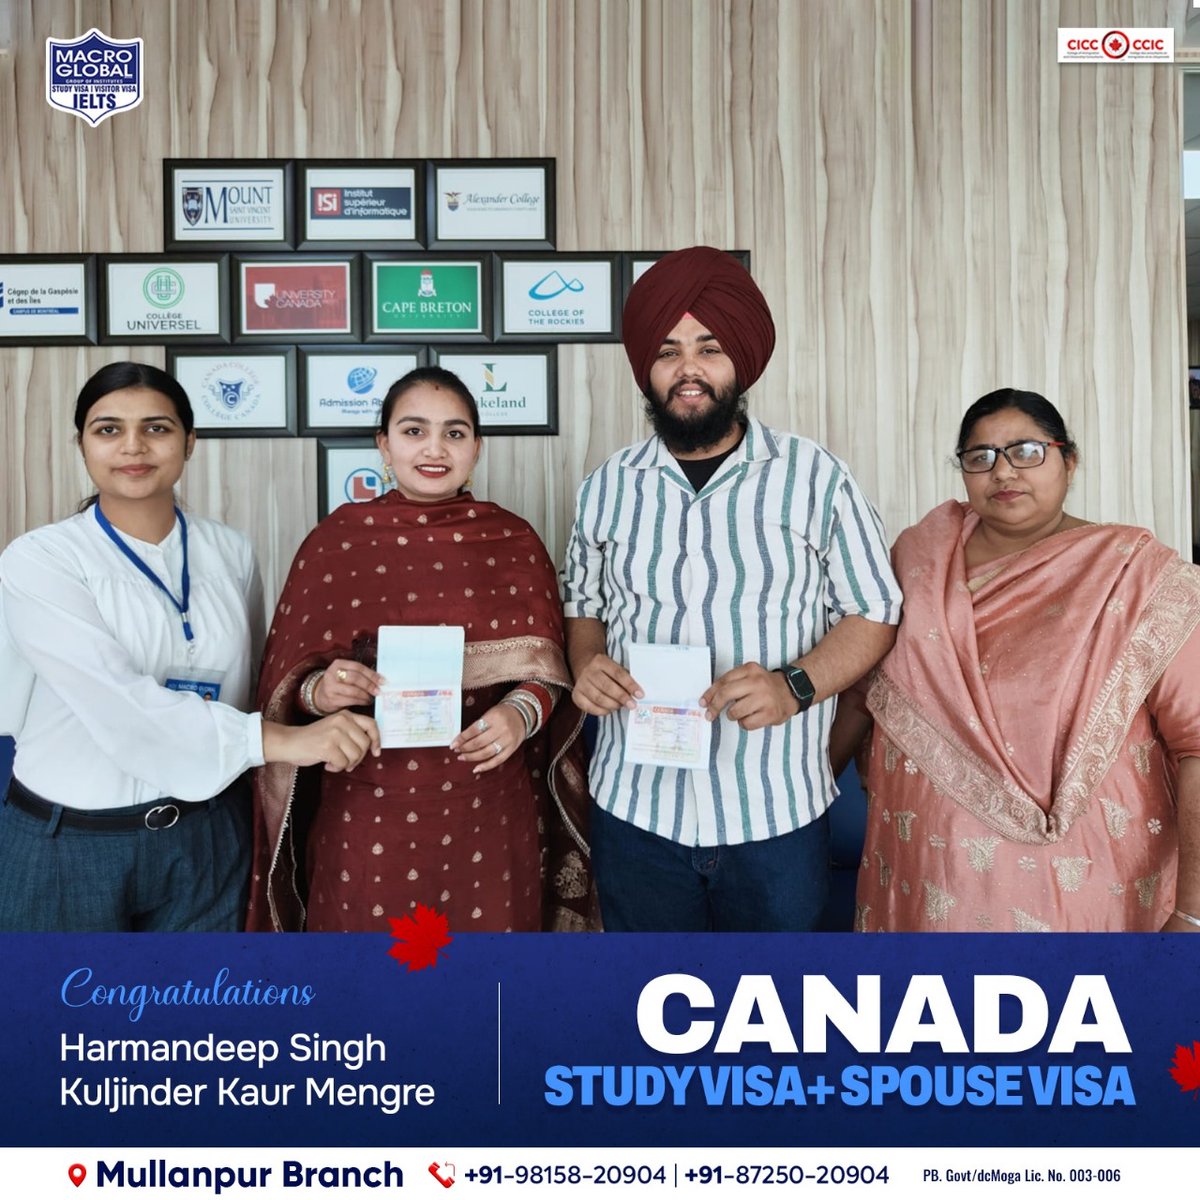 Trust our expert team, Just like Kuljinder Kaur and Harmandeep Singh did, to secure your Canadian study and spouse visas seamlessly.

#MacroGlobal #GurmilapSinghDalla #Canada #Canadastudyvisa #canadaopenworkpermit #spousevisa #Visitorvisa #Visa